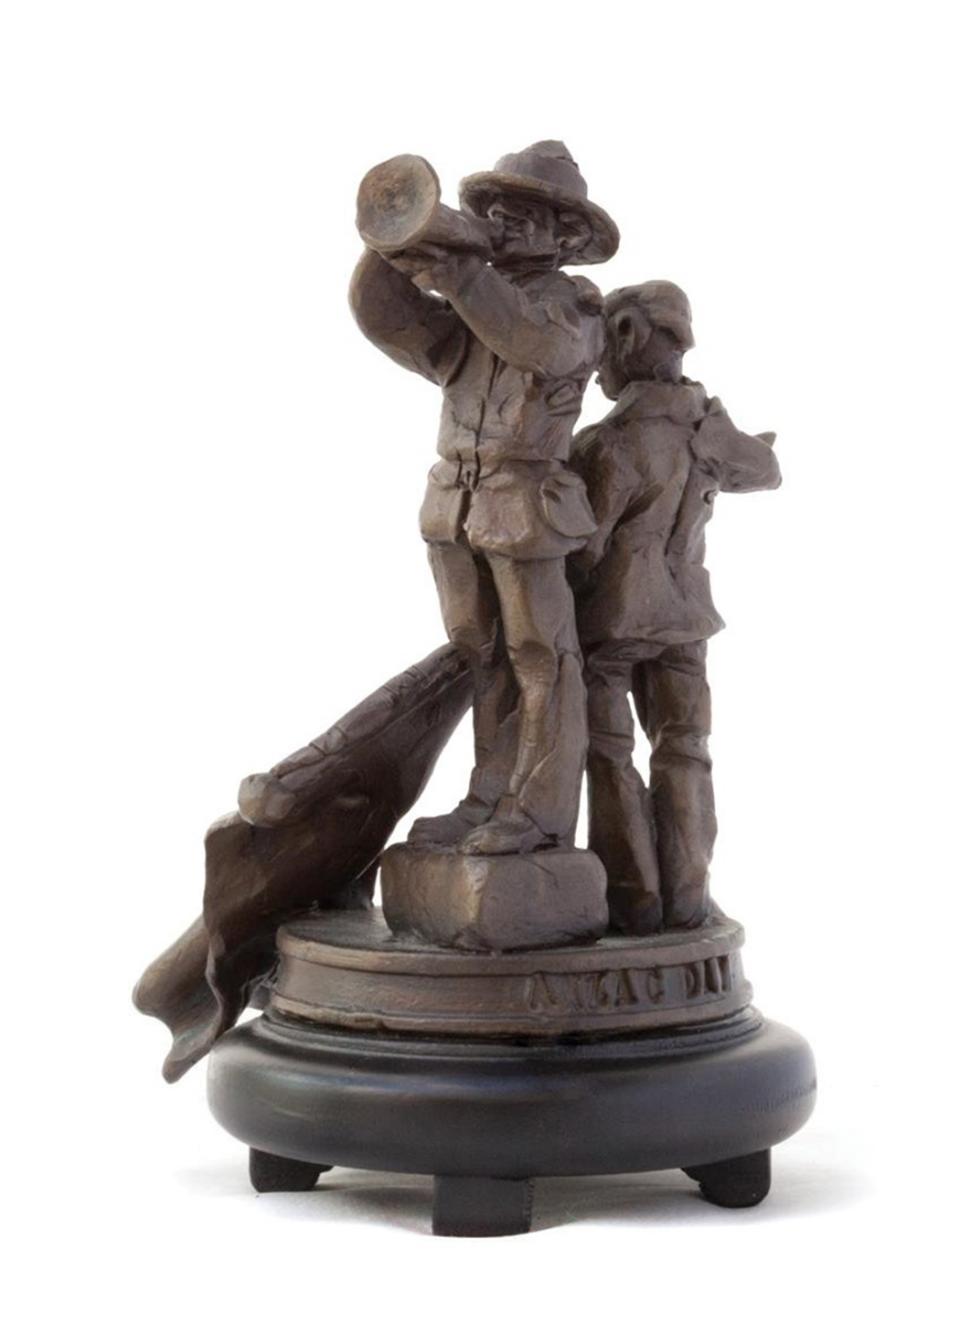 Ken Kendall Bronze sculpture from the ANZAC series Collection of Aratoi Wairarapa Museum of Art and History. Gift of Lady Helen Wilkins.